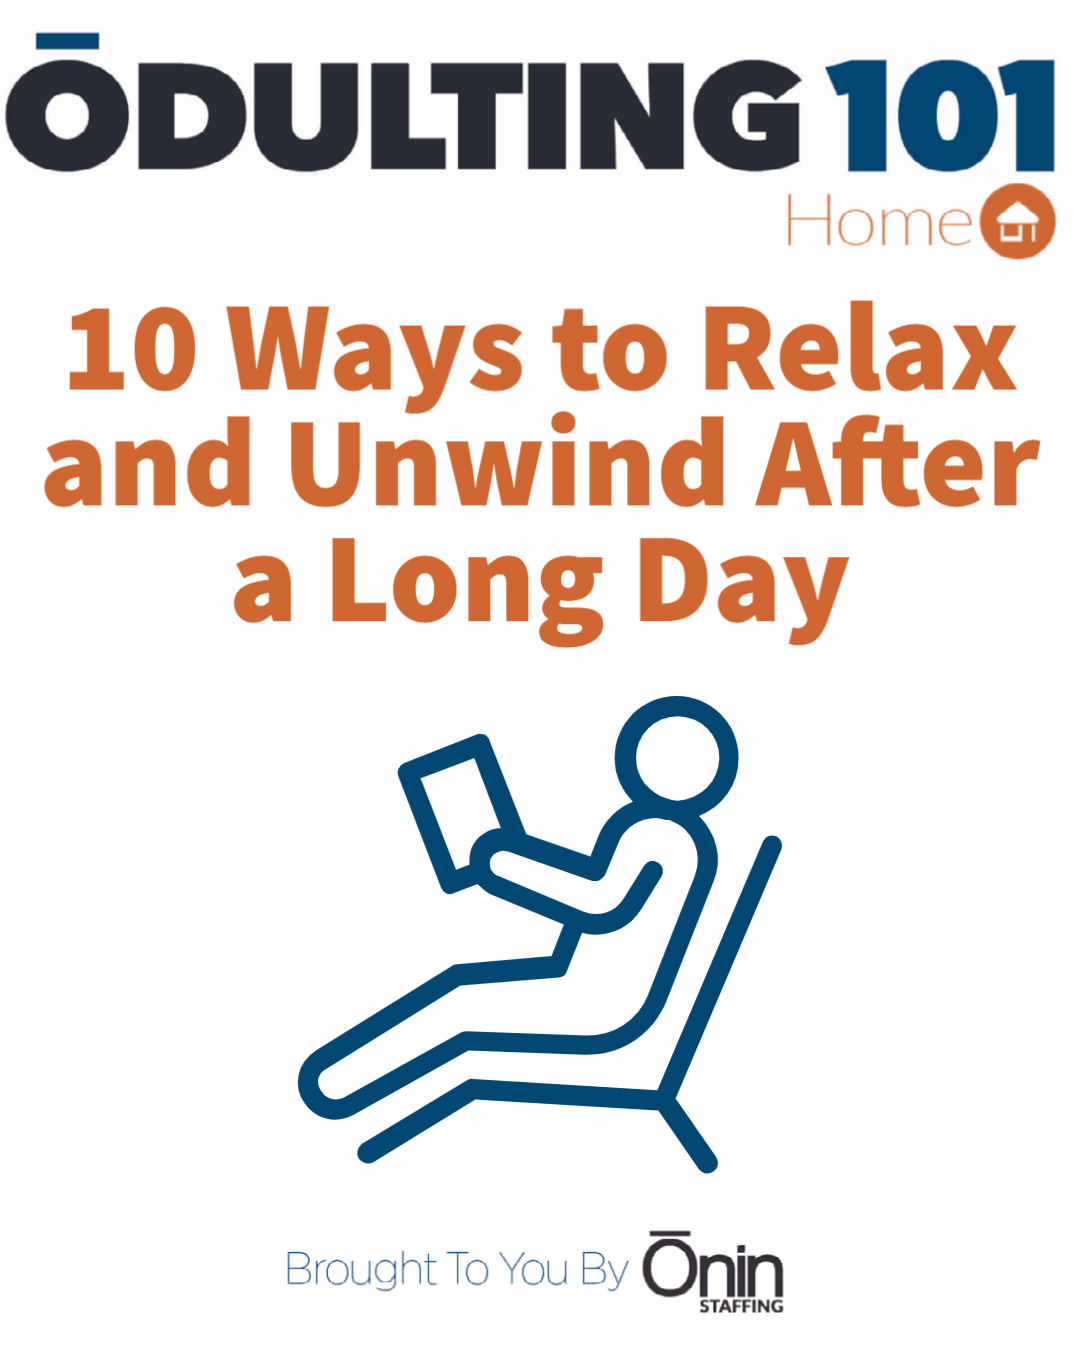 Ways to Relax and Unwind - IG_FB